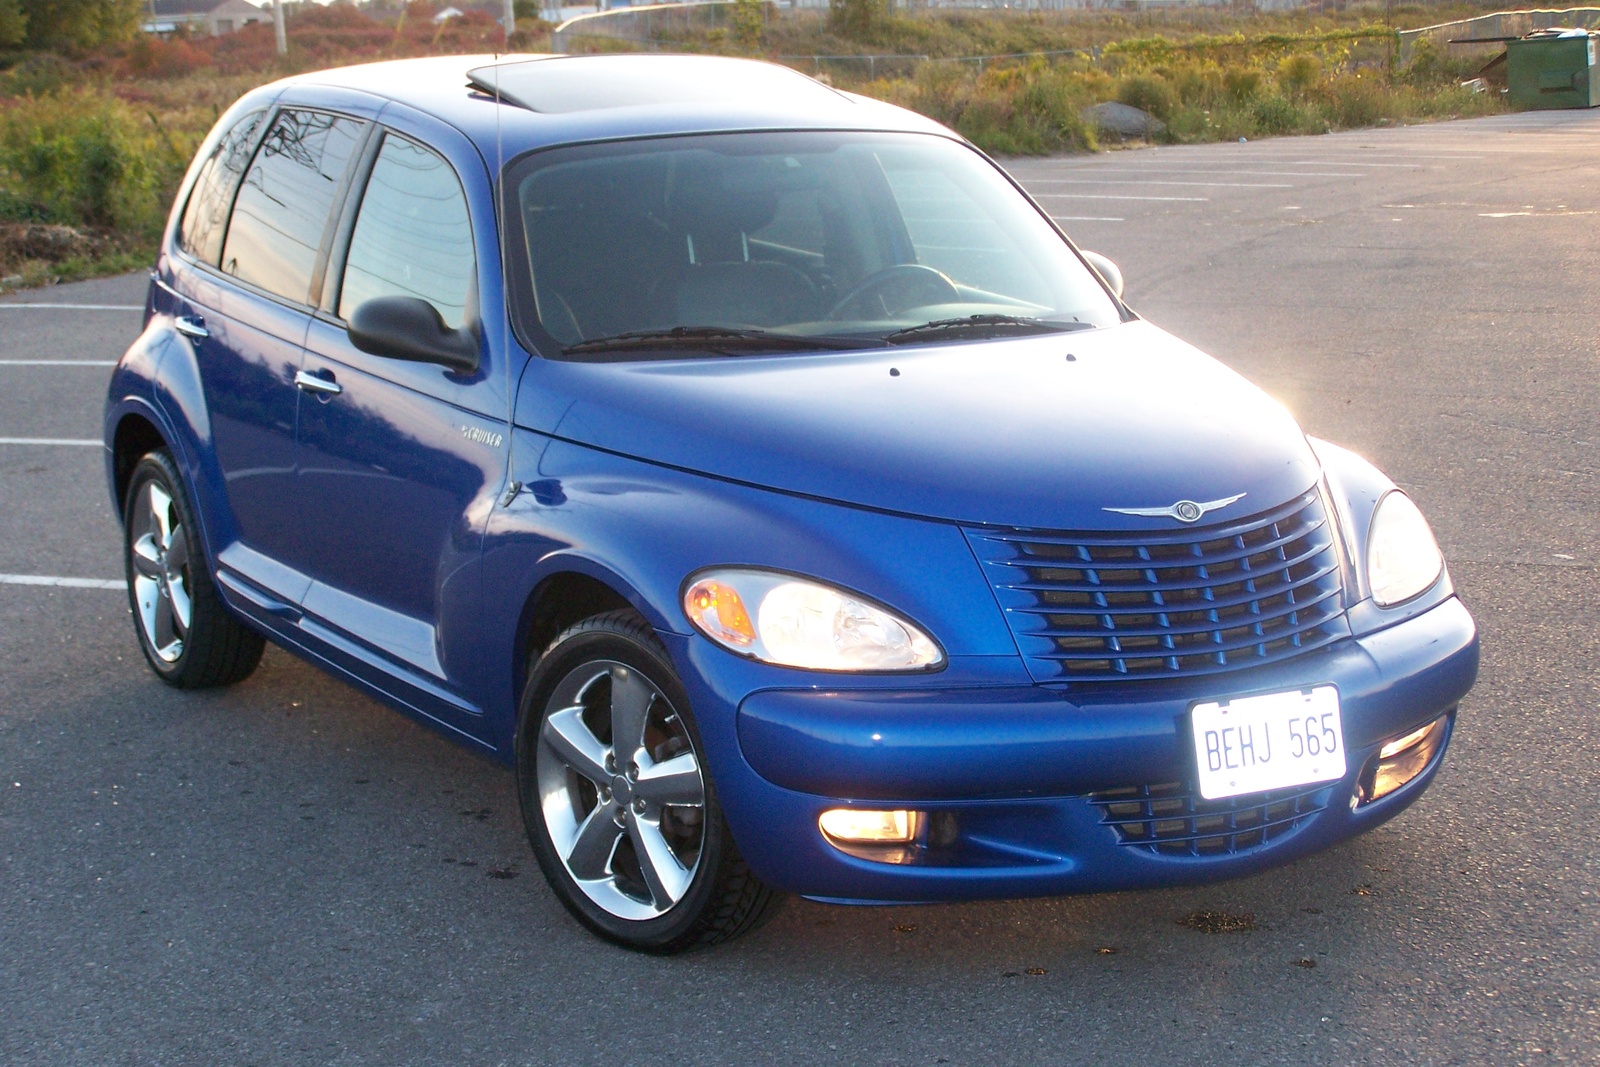 Problems with the chrysler pt cruiser